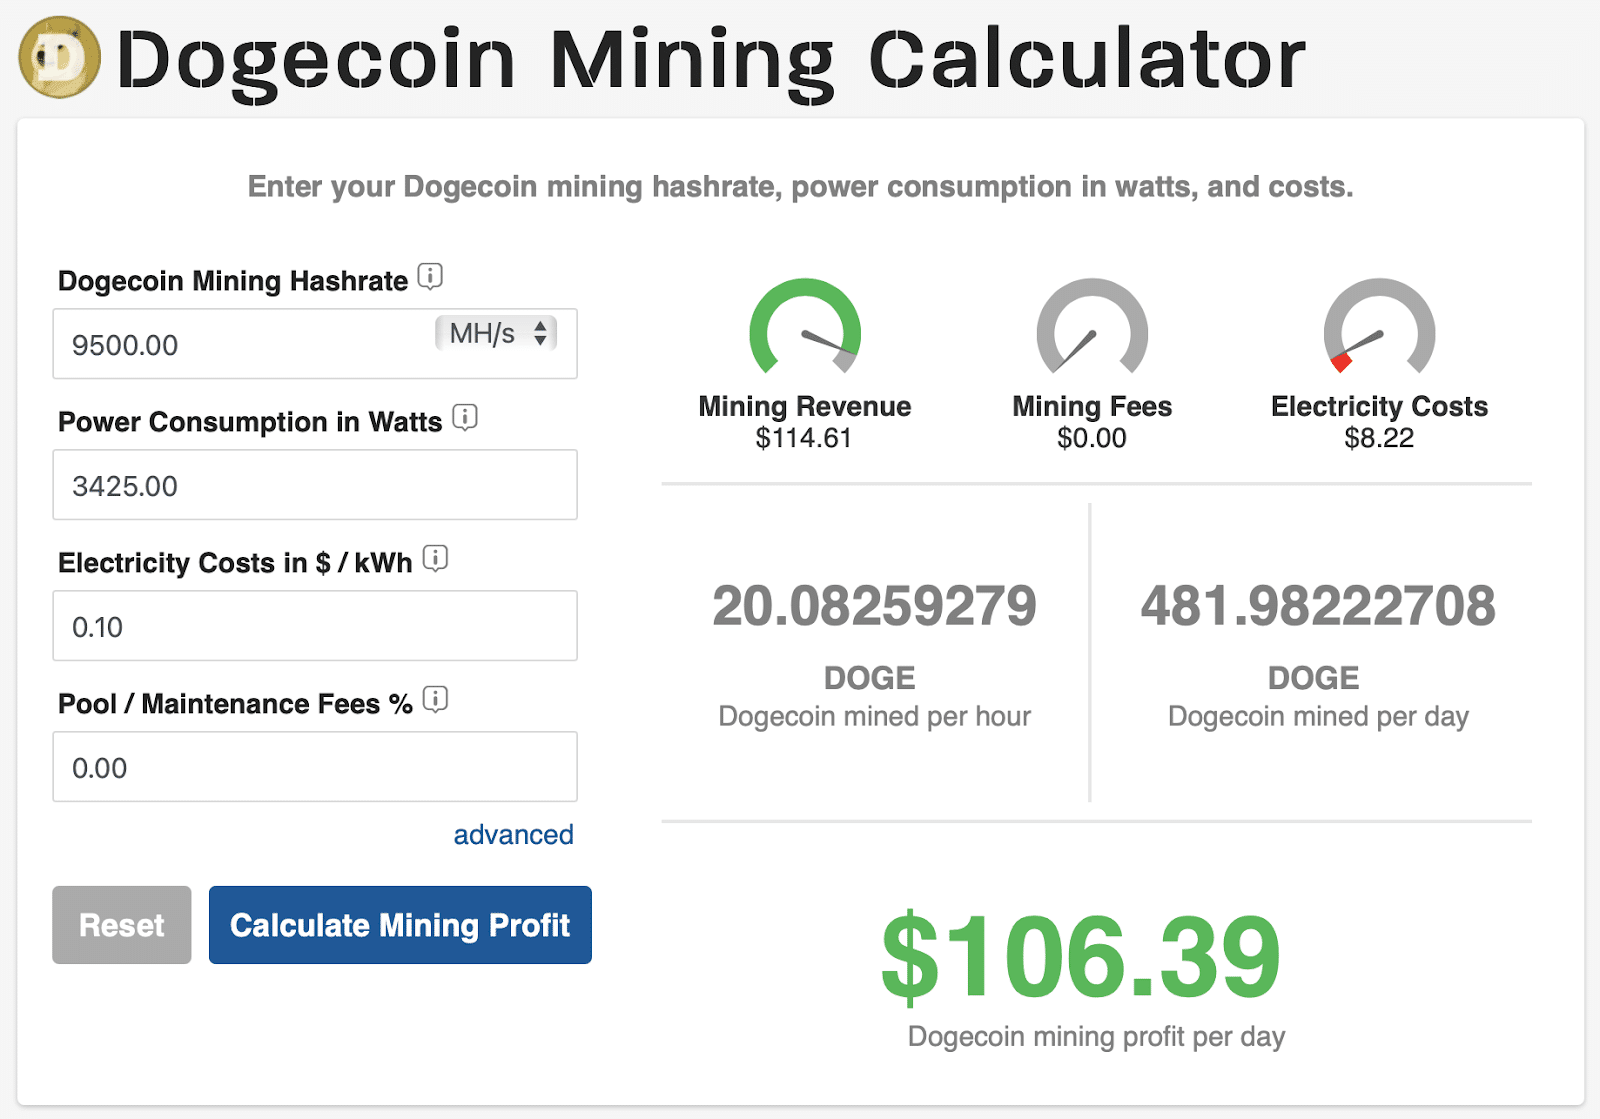 How to Mine Dogecoin in A Step-by-Step Tutorial